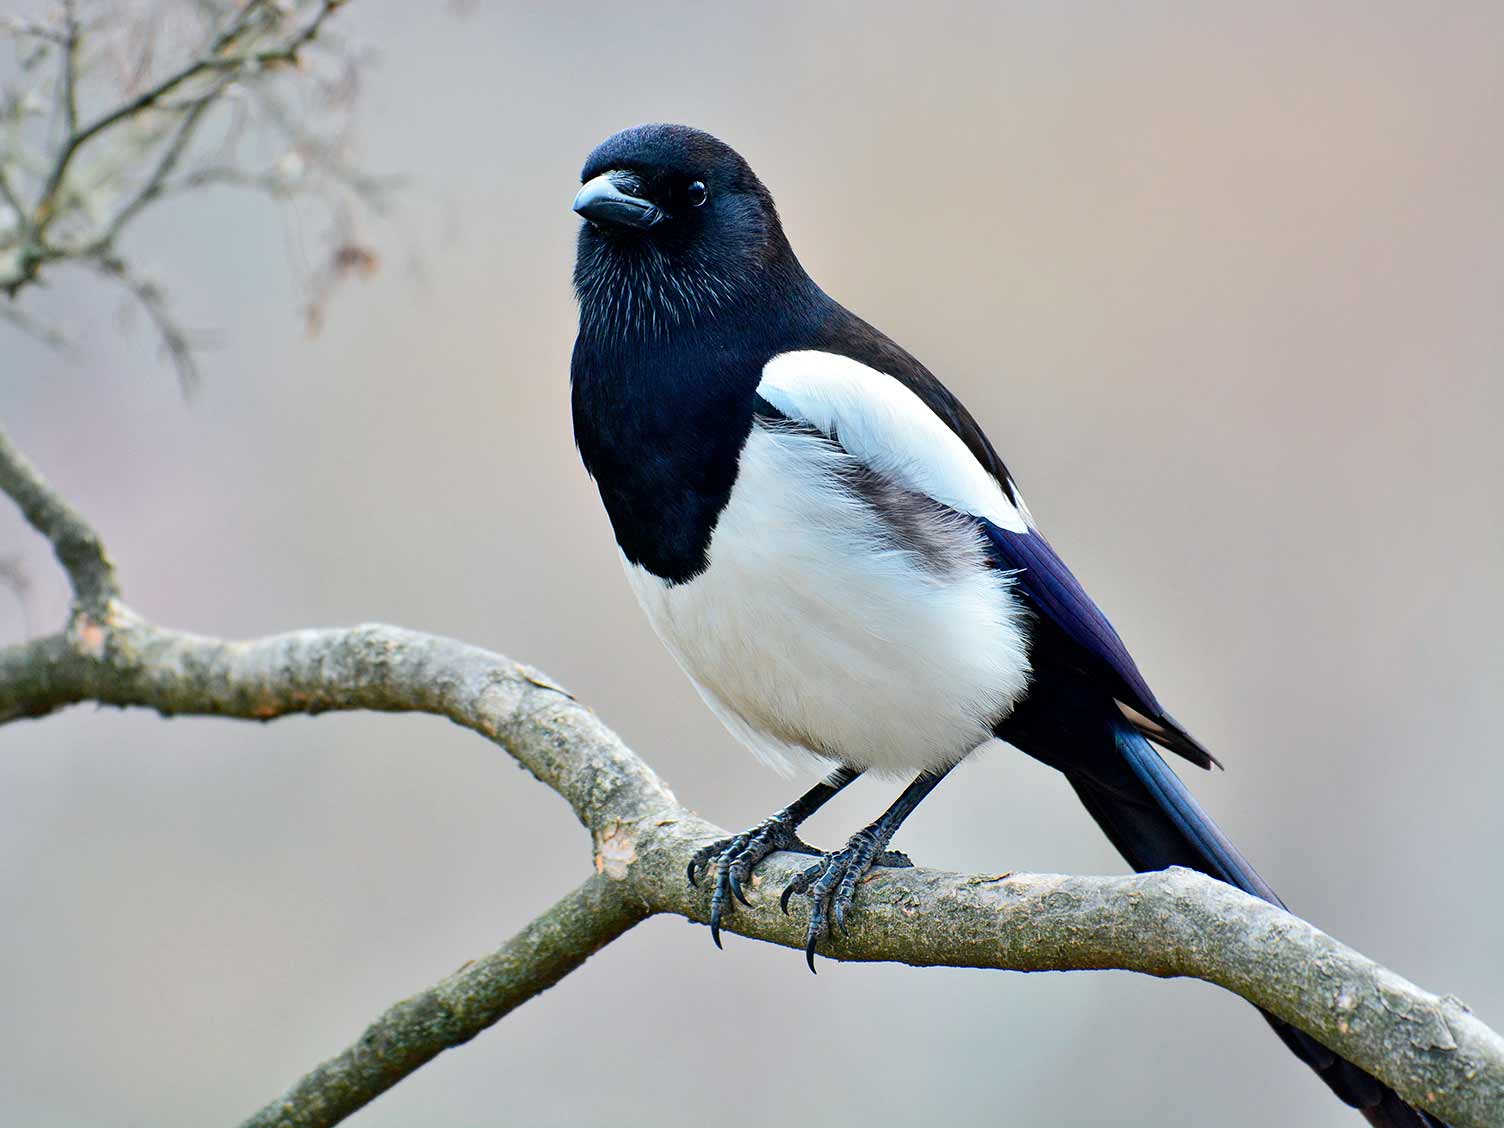 Black And White Bird With Blue Tail Uk - Frikilo Quesea